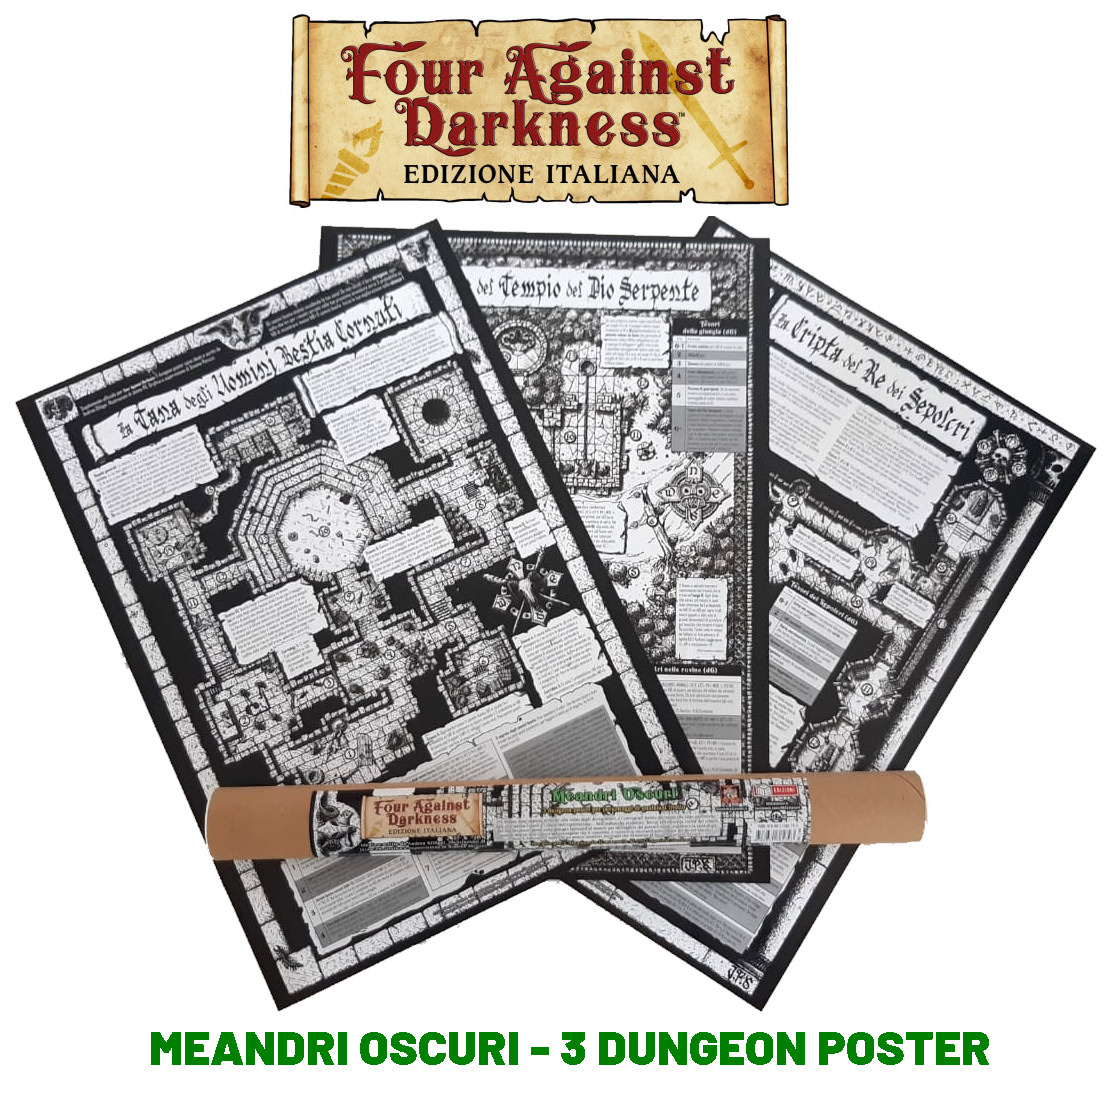 FOUR AGAINST DARKNESS: MEANDRI OSCURI - 3 DUNGEON POSTER